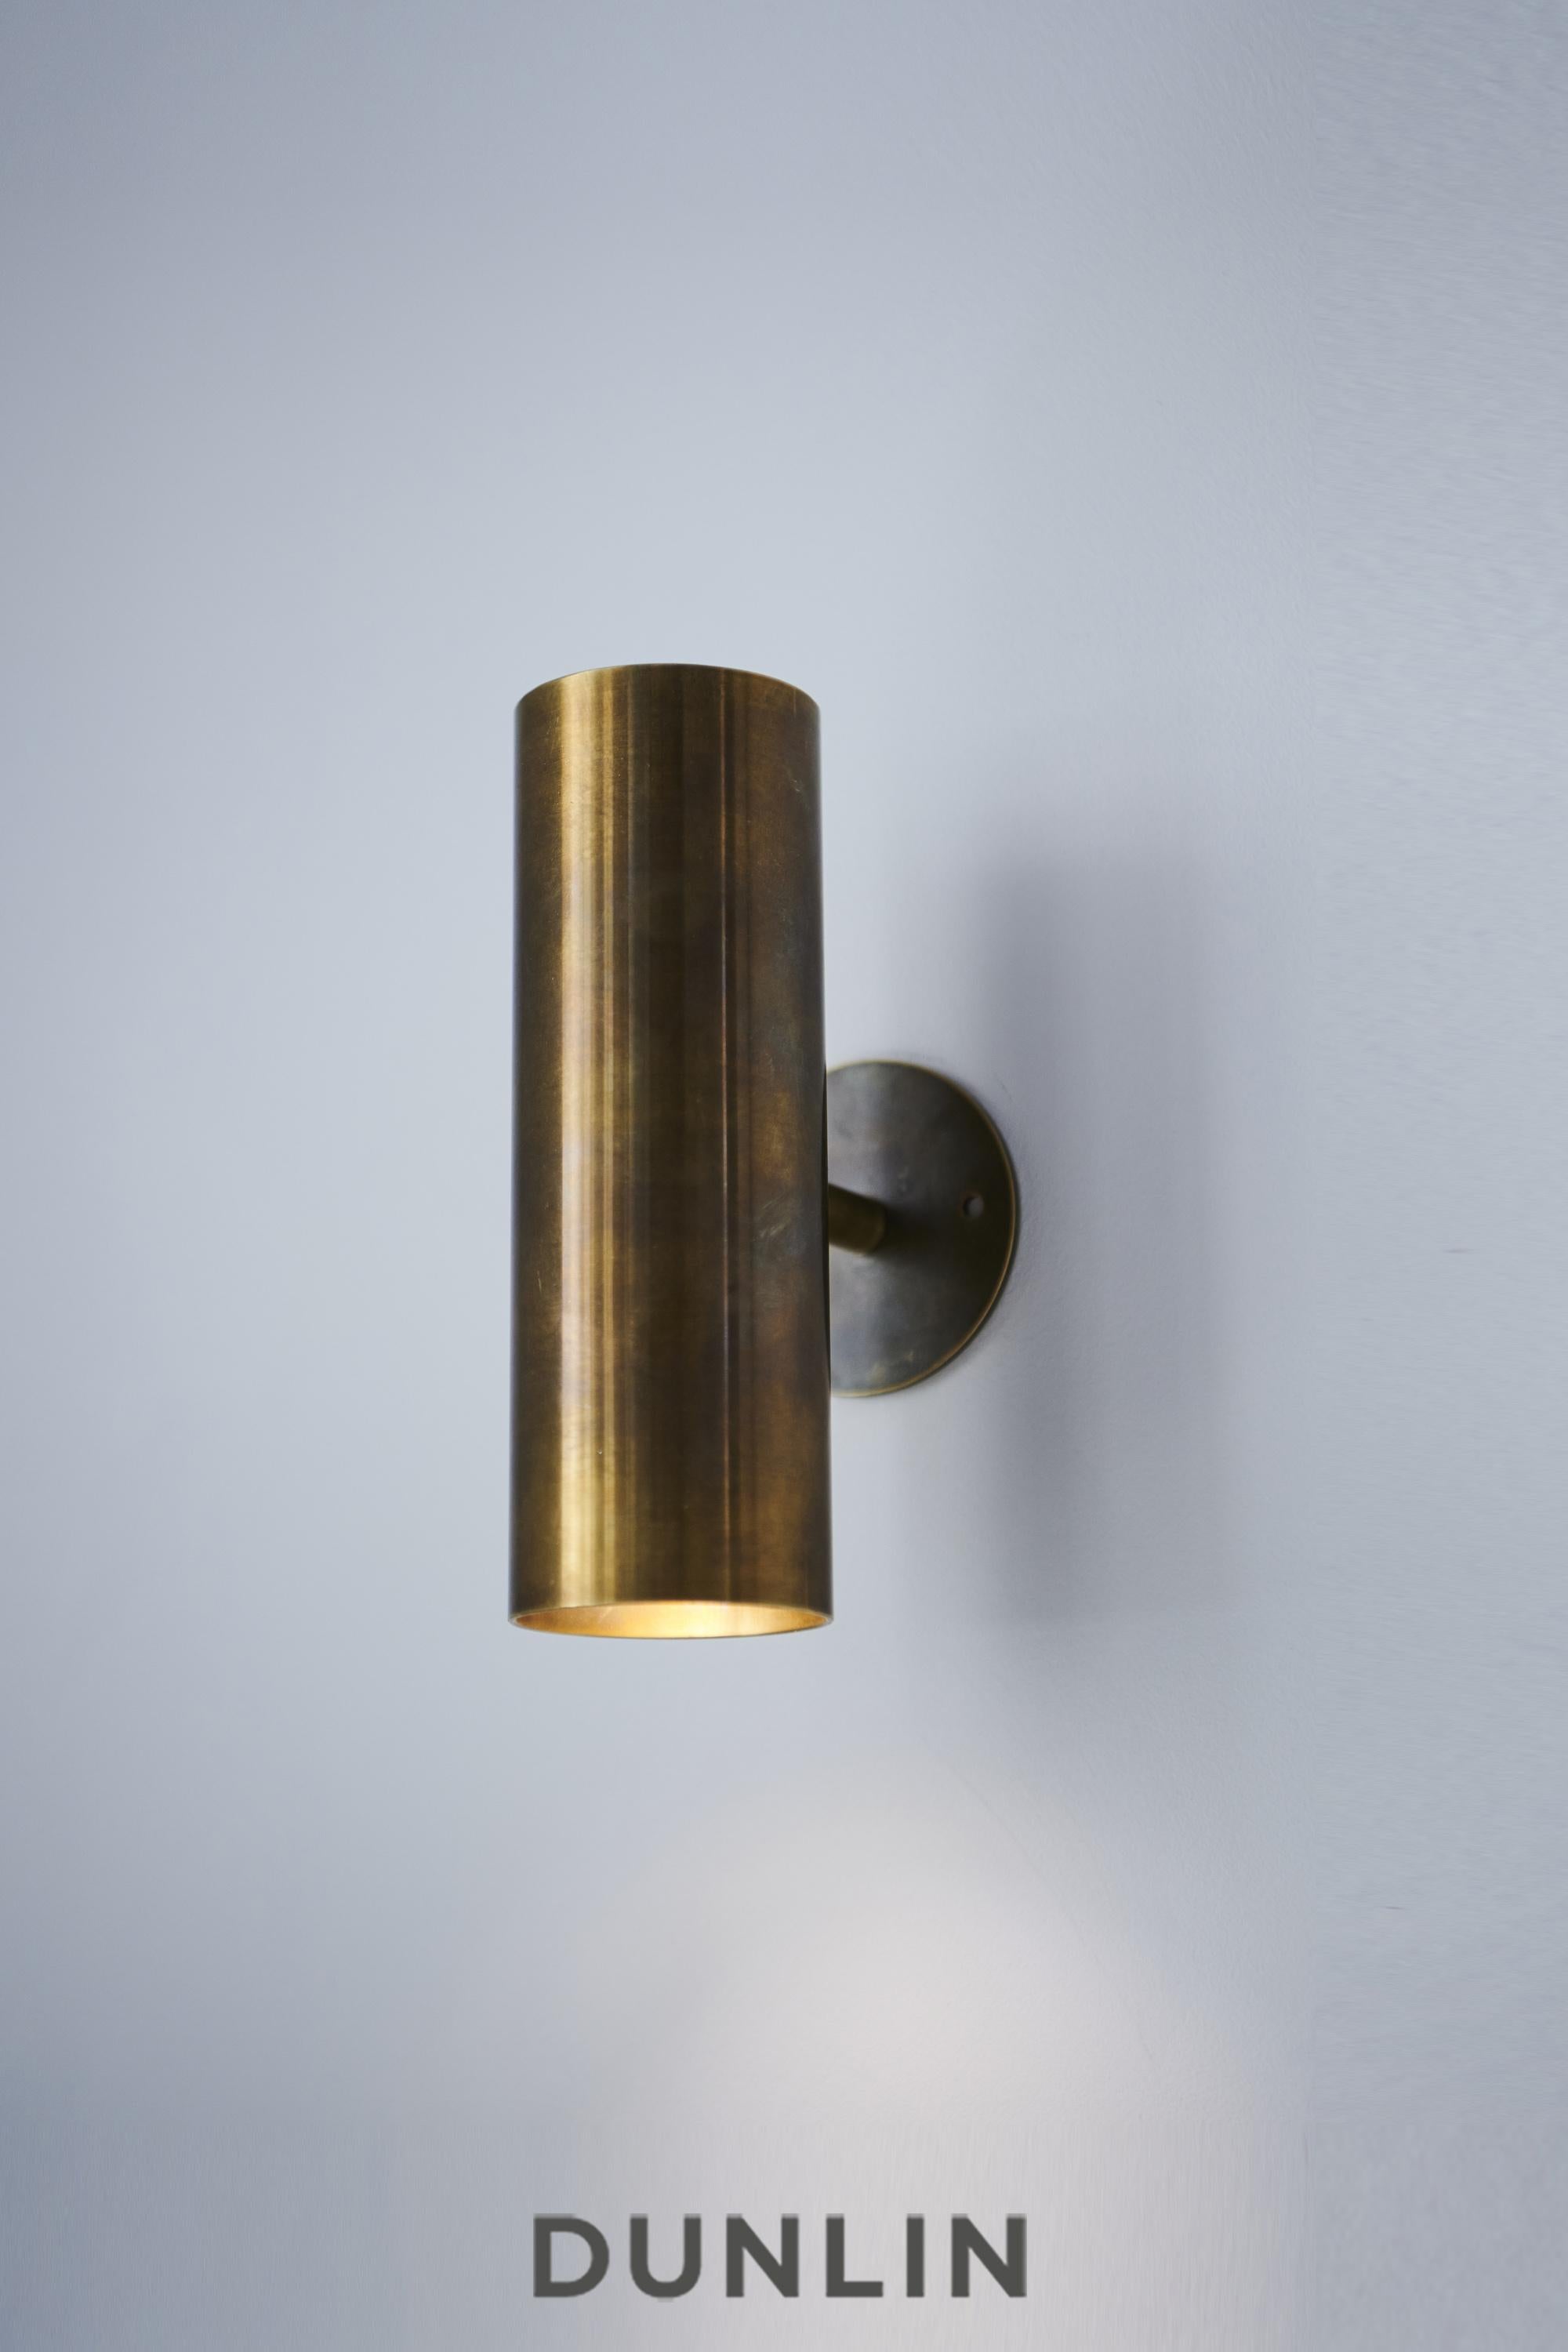 Handmade in solid brass in Sydney, Australia by Dunlin. 

A playful up-down light in solid brass.
Measures: 6.3 cm Diameter x 22 cm Long
Finish: Tarnished Raw Brass
Two lamp holders direct light vertically up and down, or sideways if installed